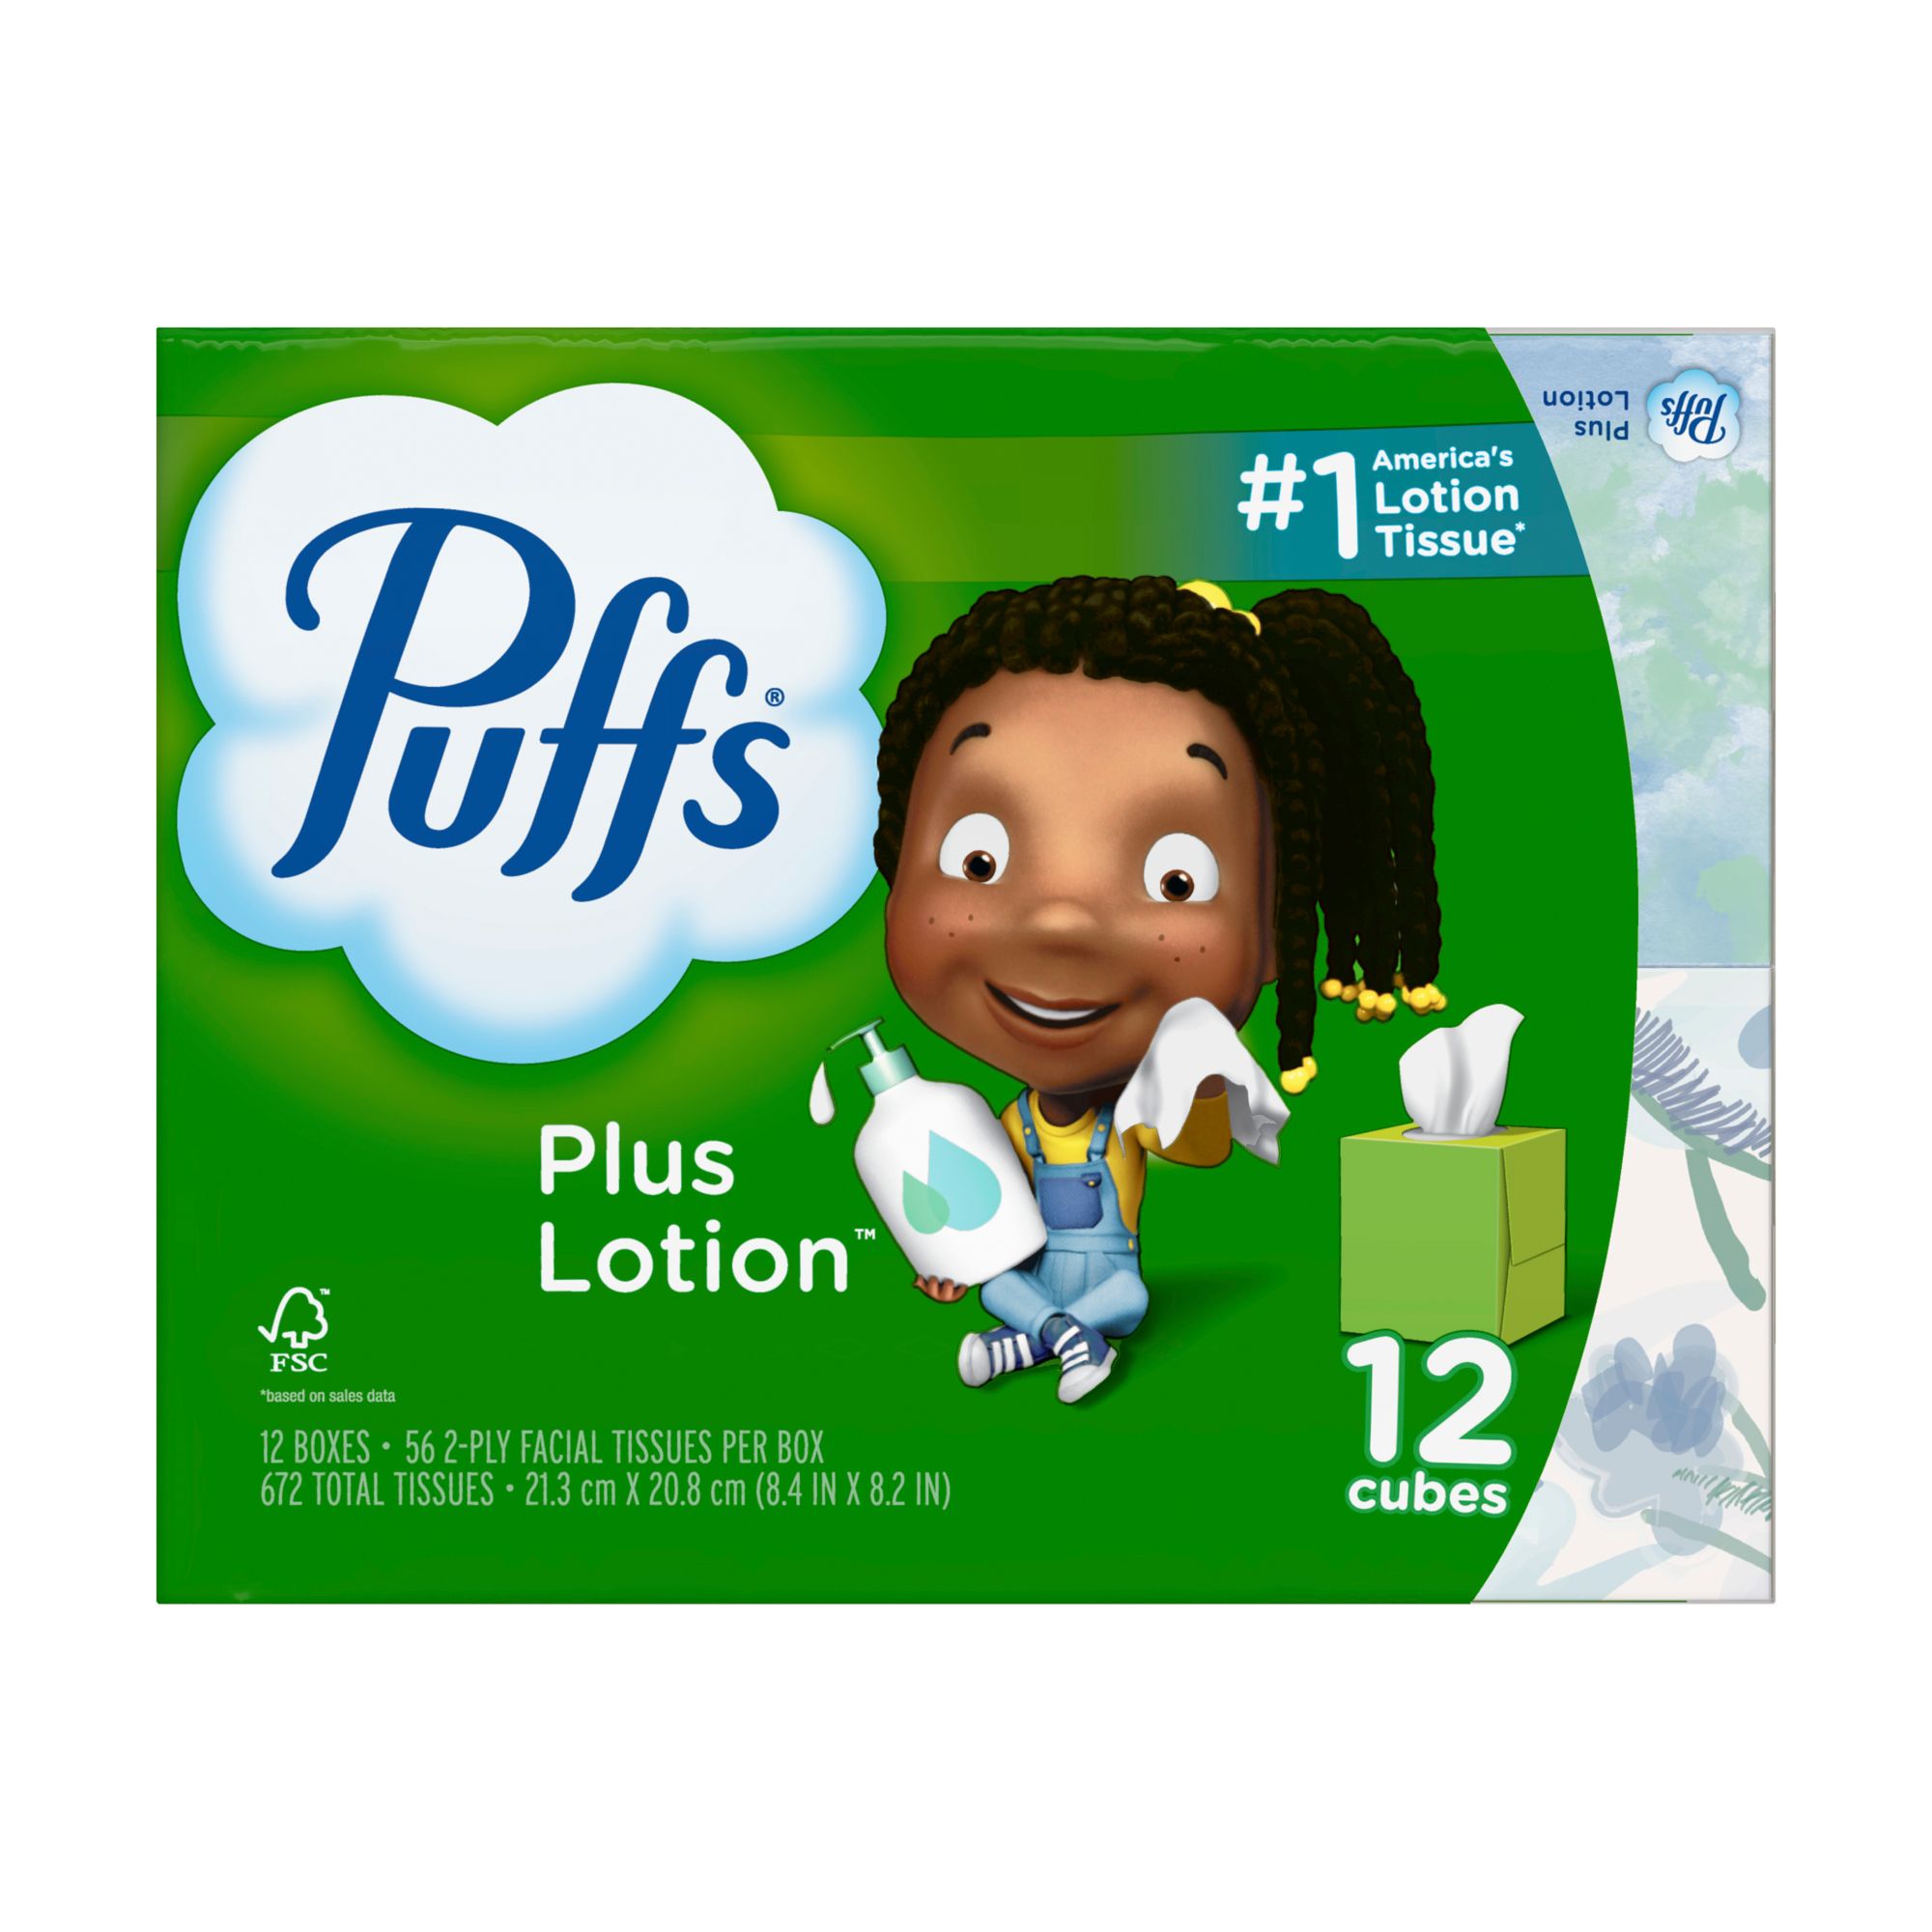 Puffs Plus Lotion 560-Count Facial Tissues as low as $13.02 After Coupon  (Reg. $16.85) + Free Shipping - $1.30/ 56-Count Box or 2¢/Tissue -  Fabulessly Frugal